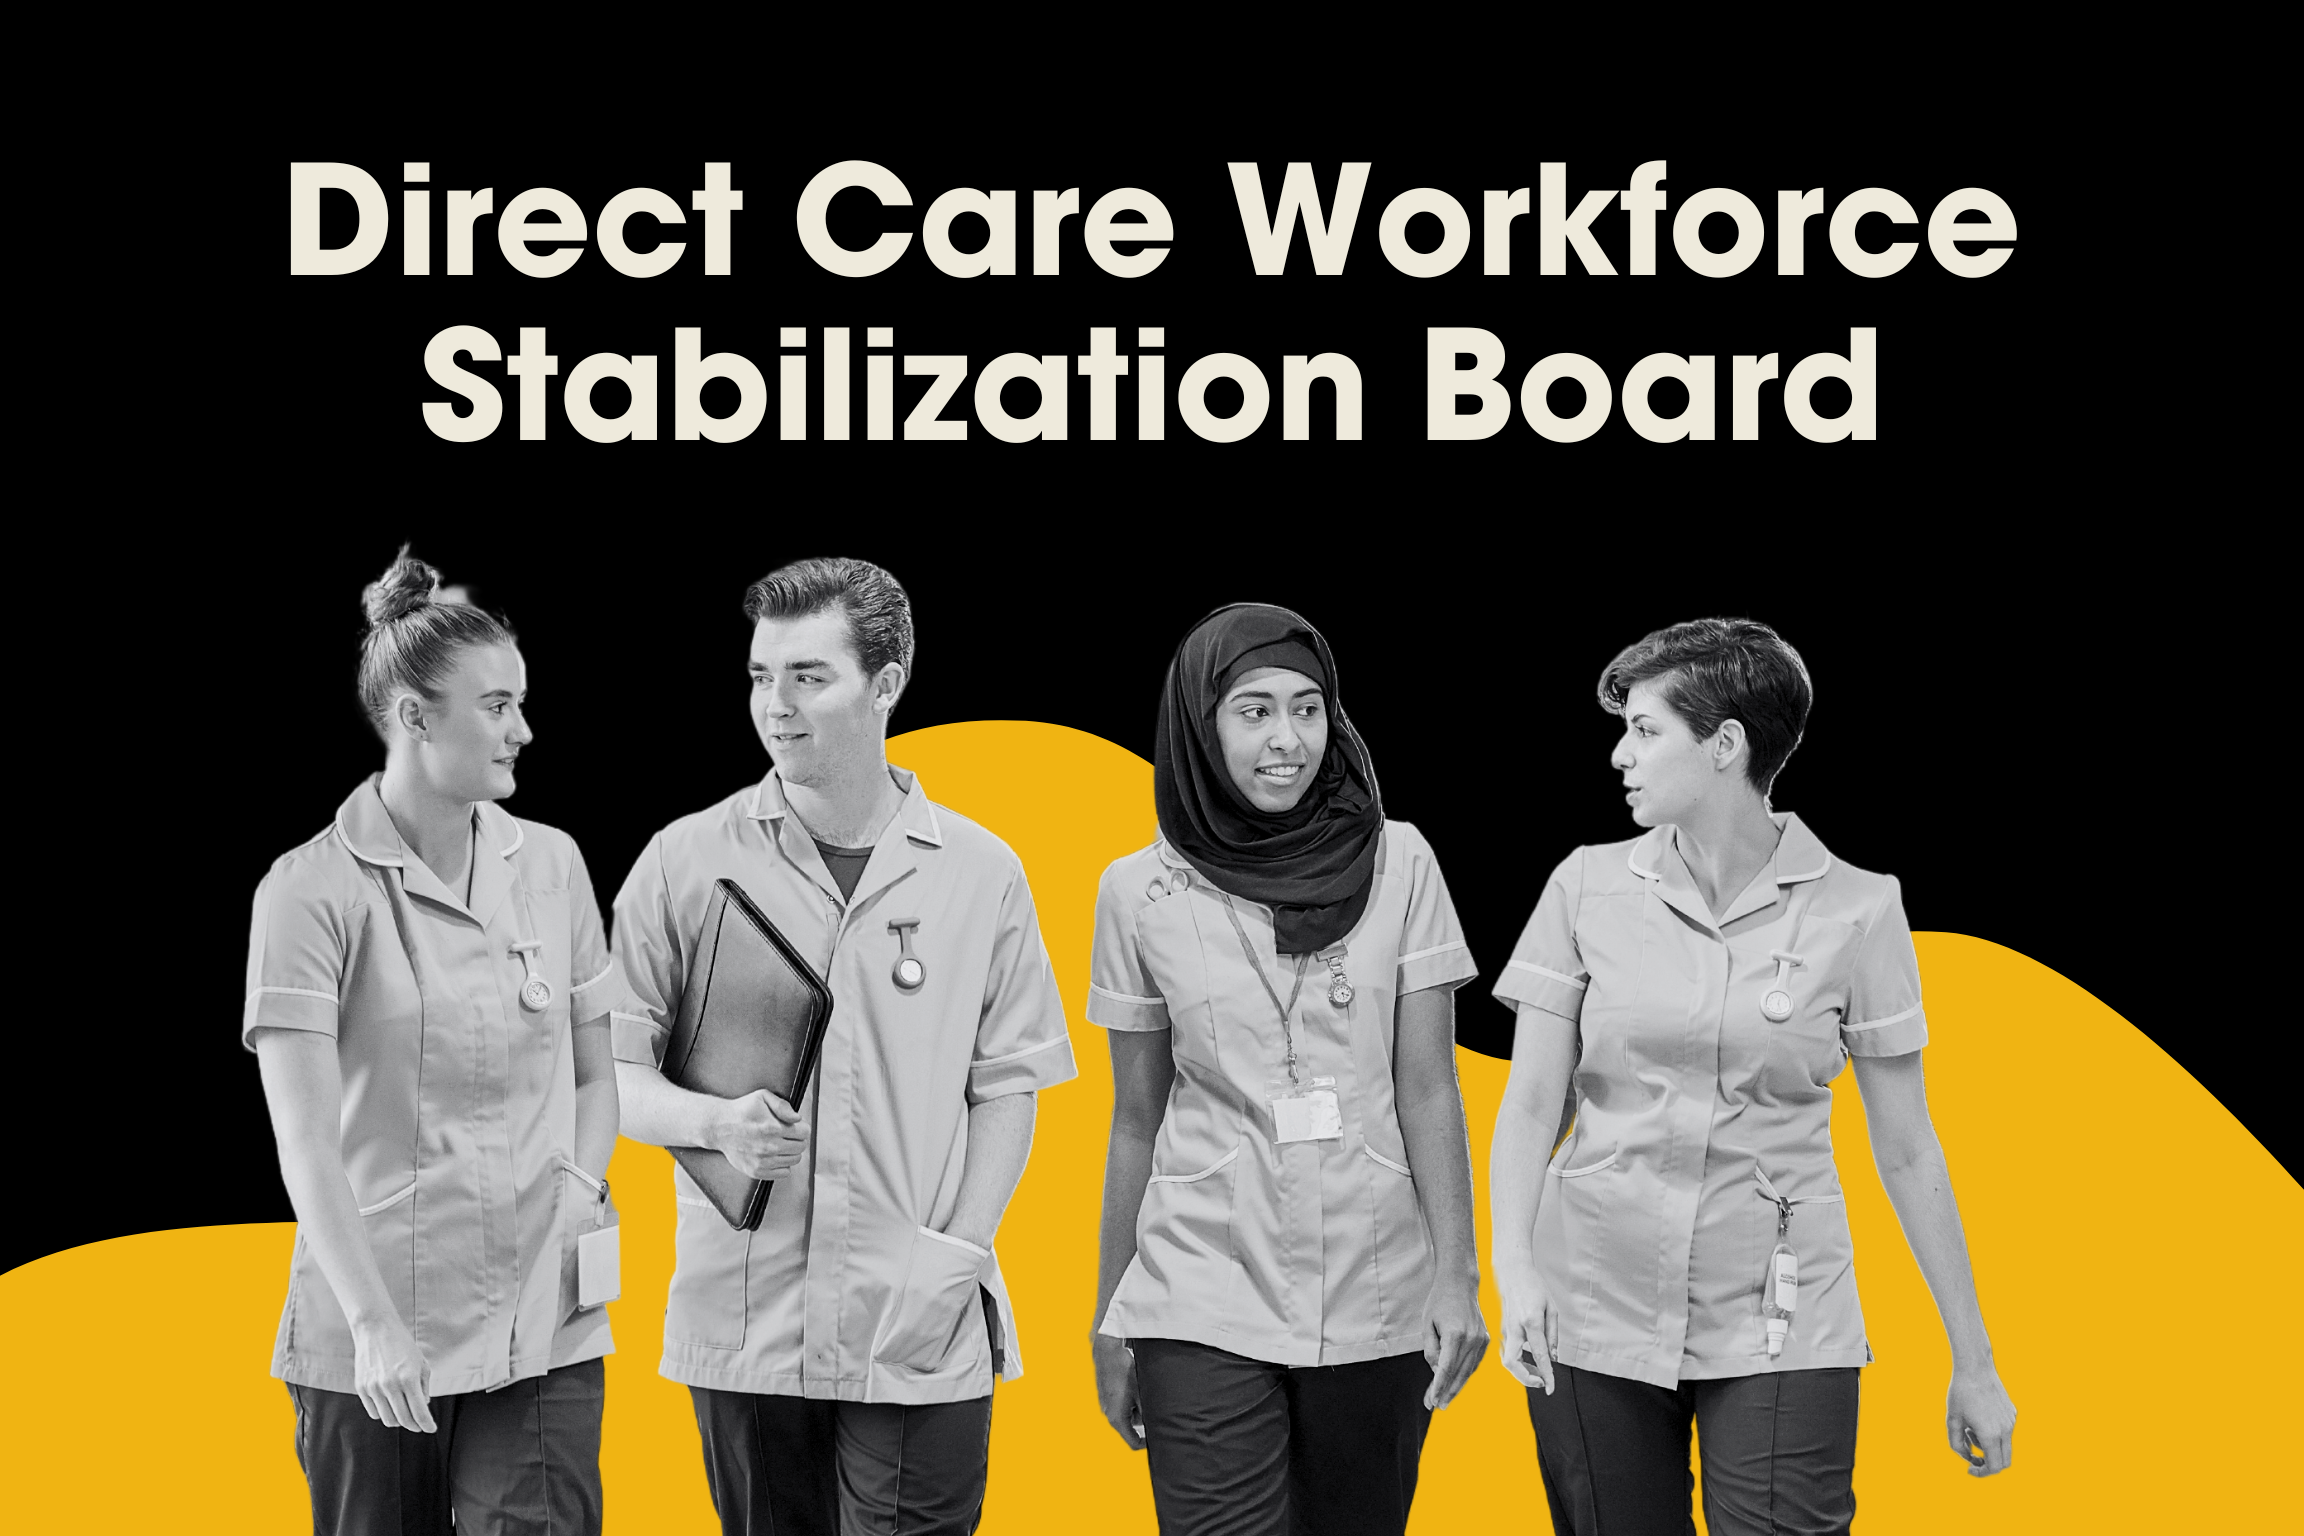 Four healthcare professionals stand together as representatives of the workforce stabilization board.